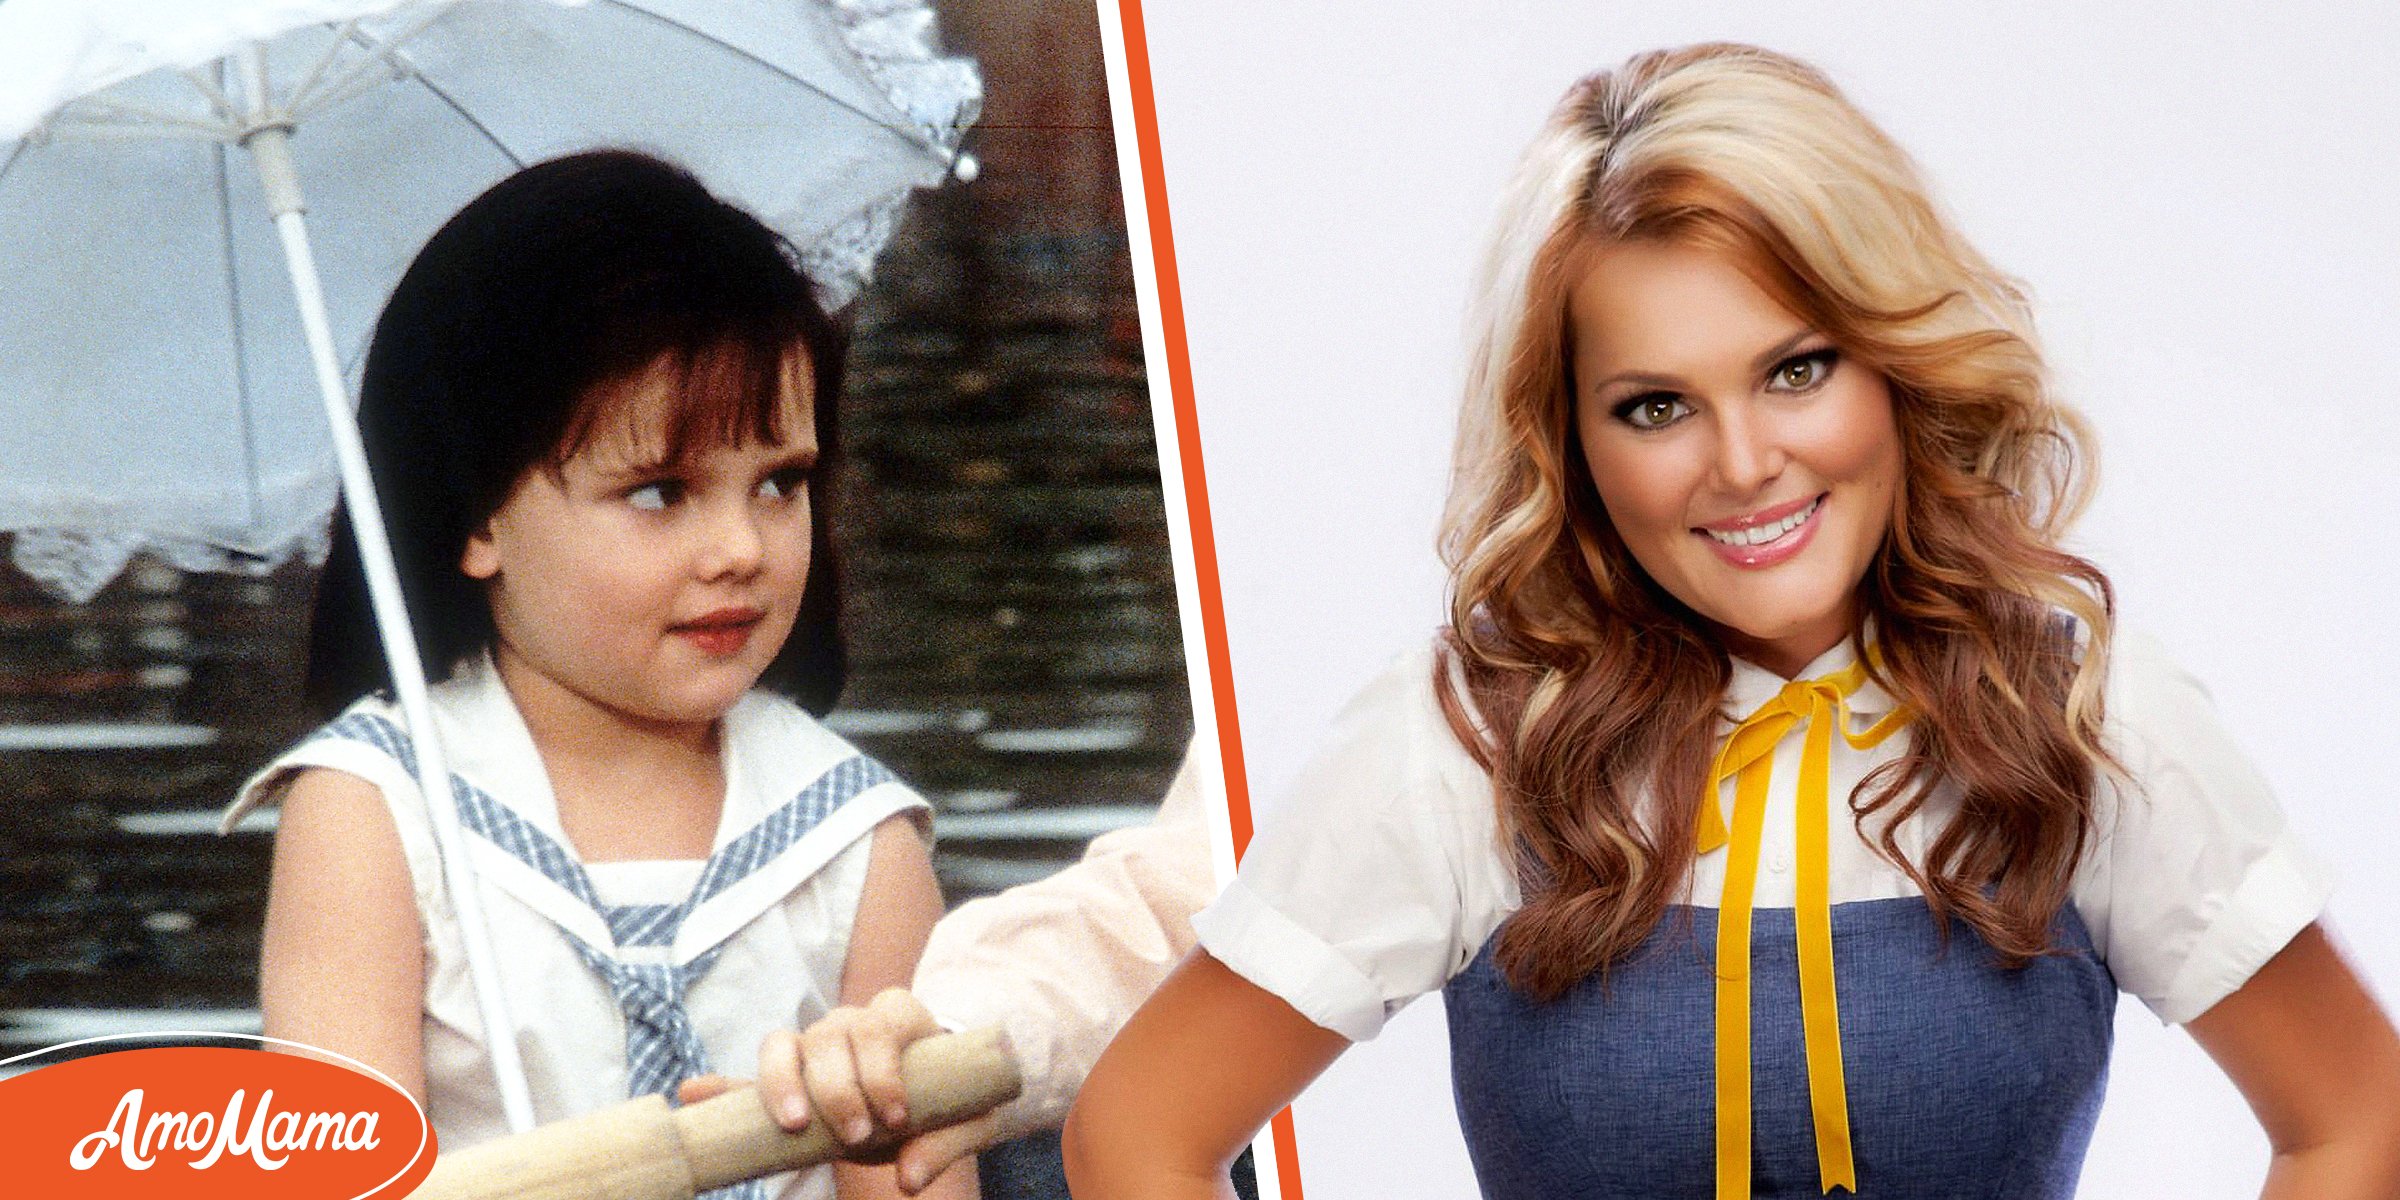 Brittany Ashton Holmes Who Starred in ‘The Little Rascals’ Where Is